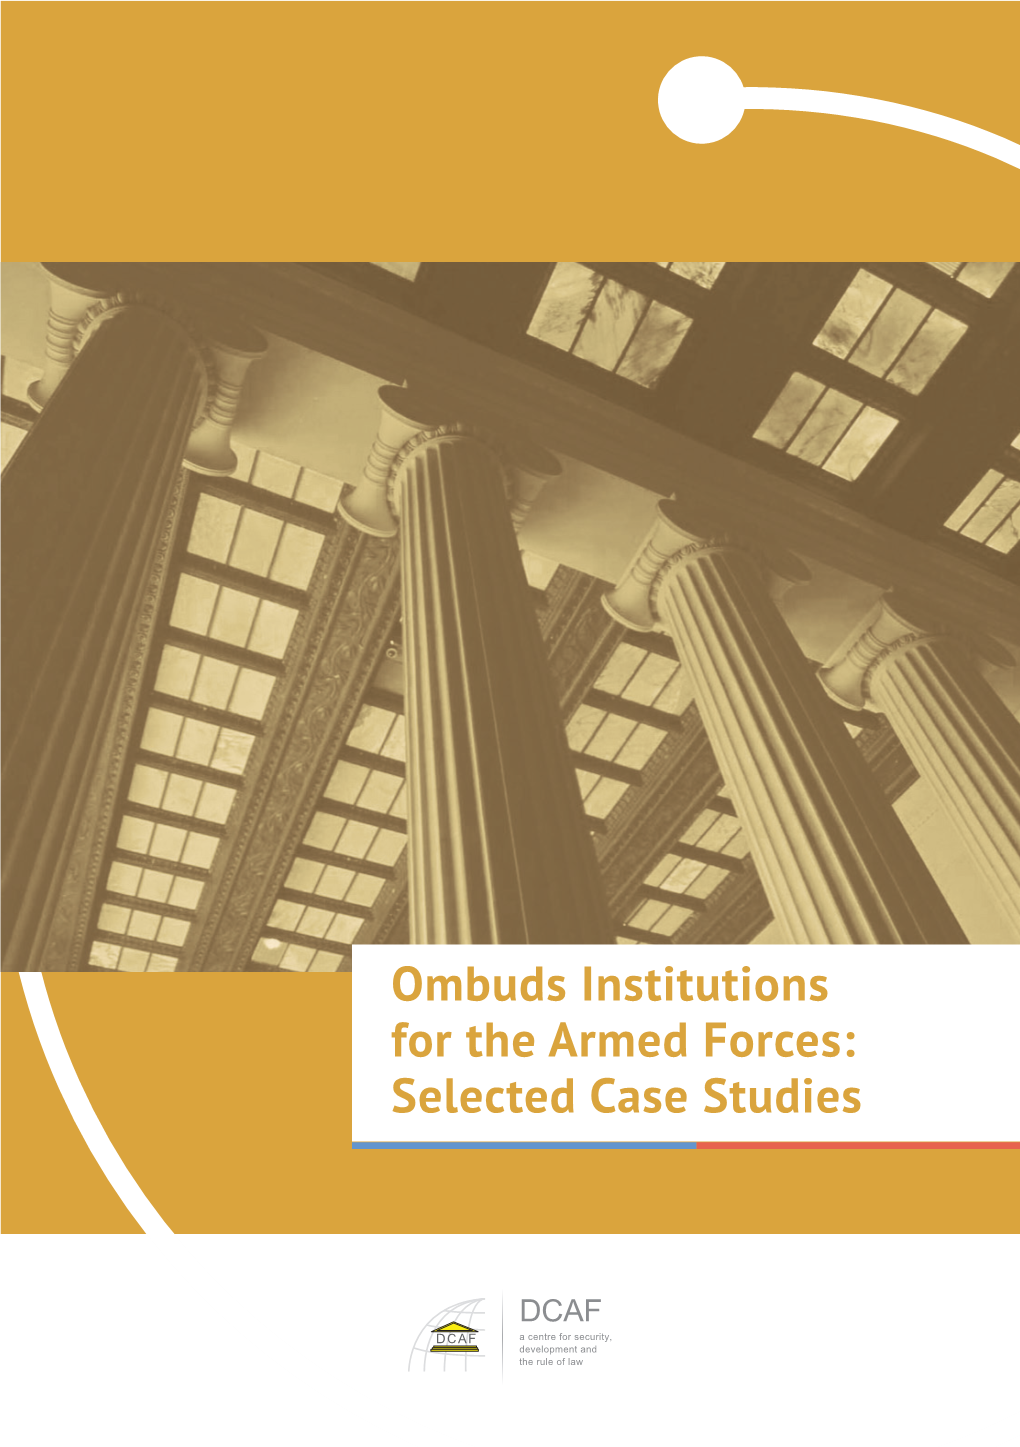 Ombuds Institutions for the Armed Forces: Selected Case Studies